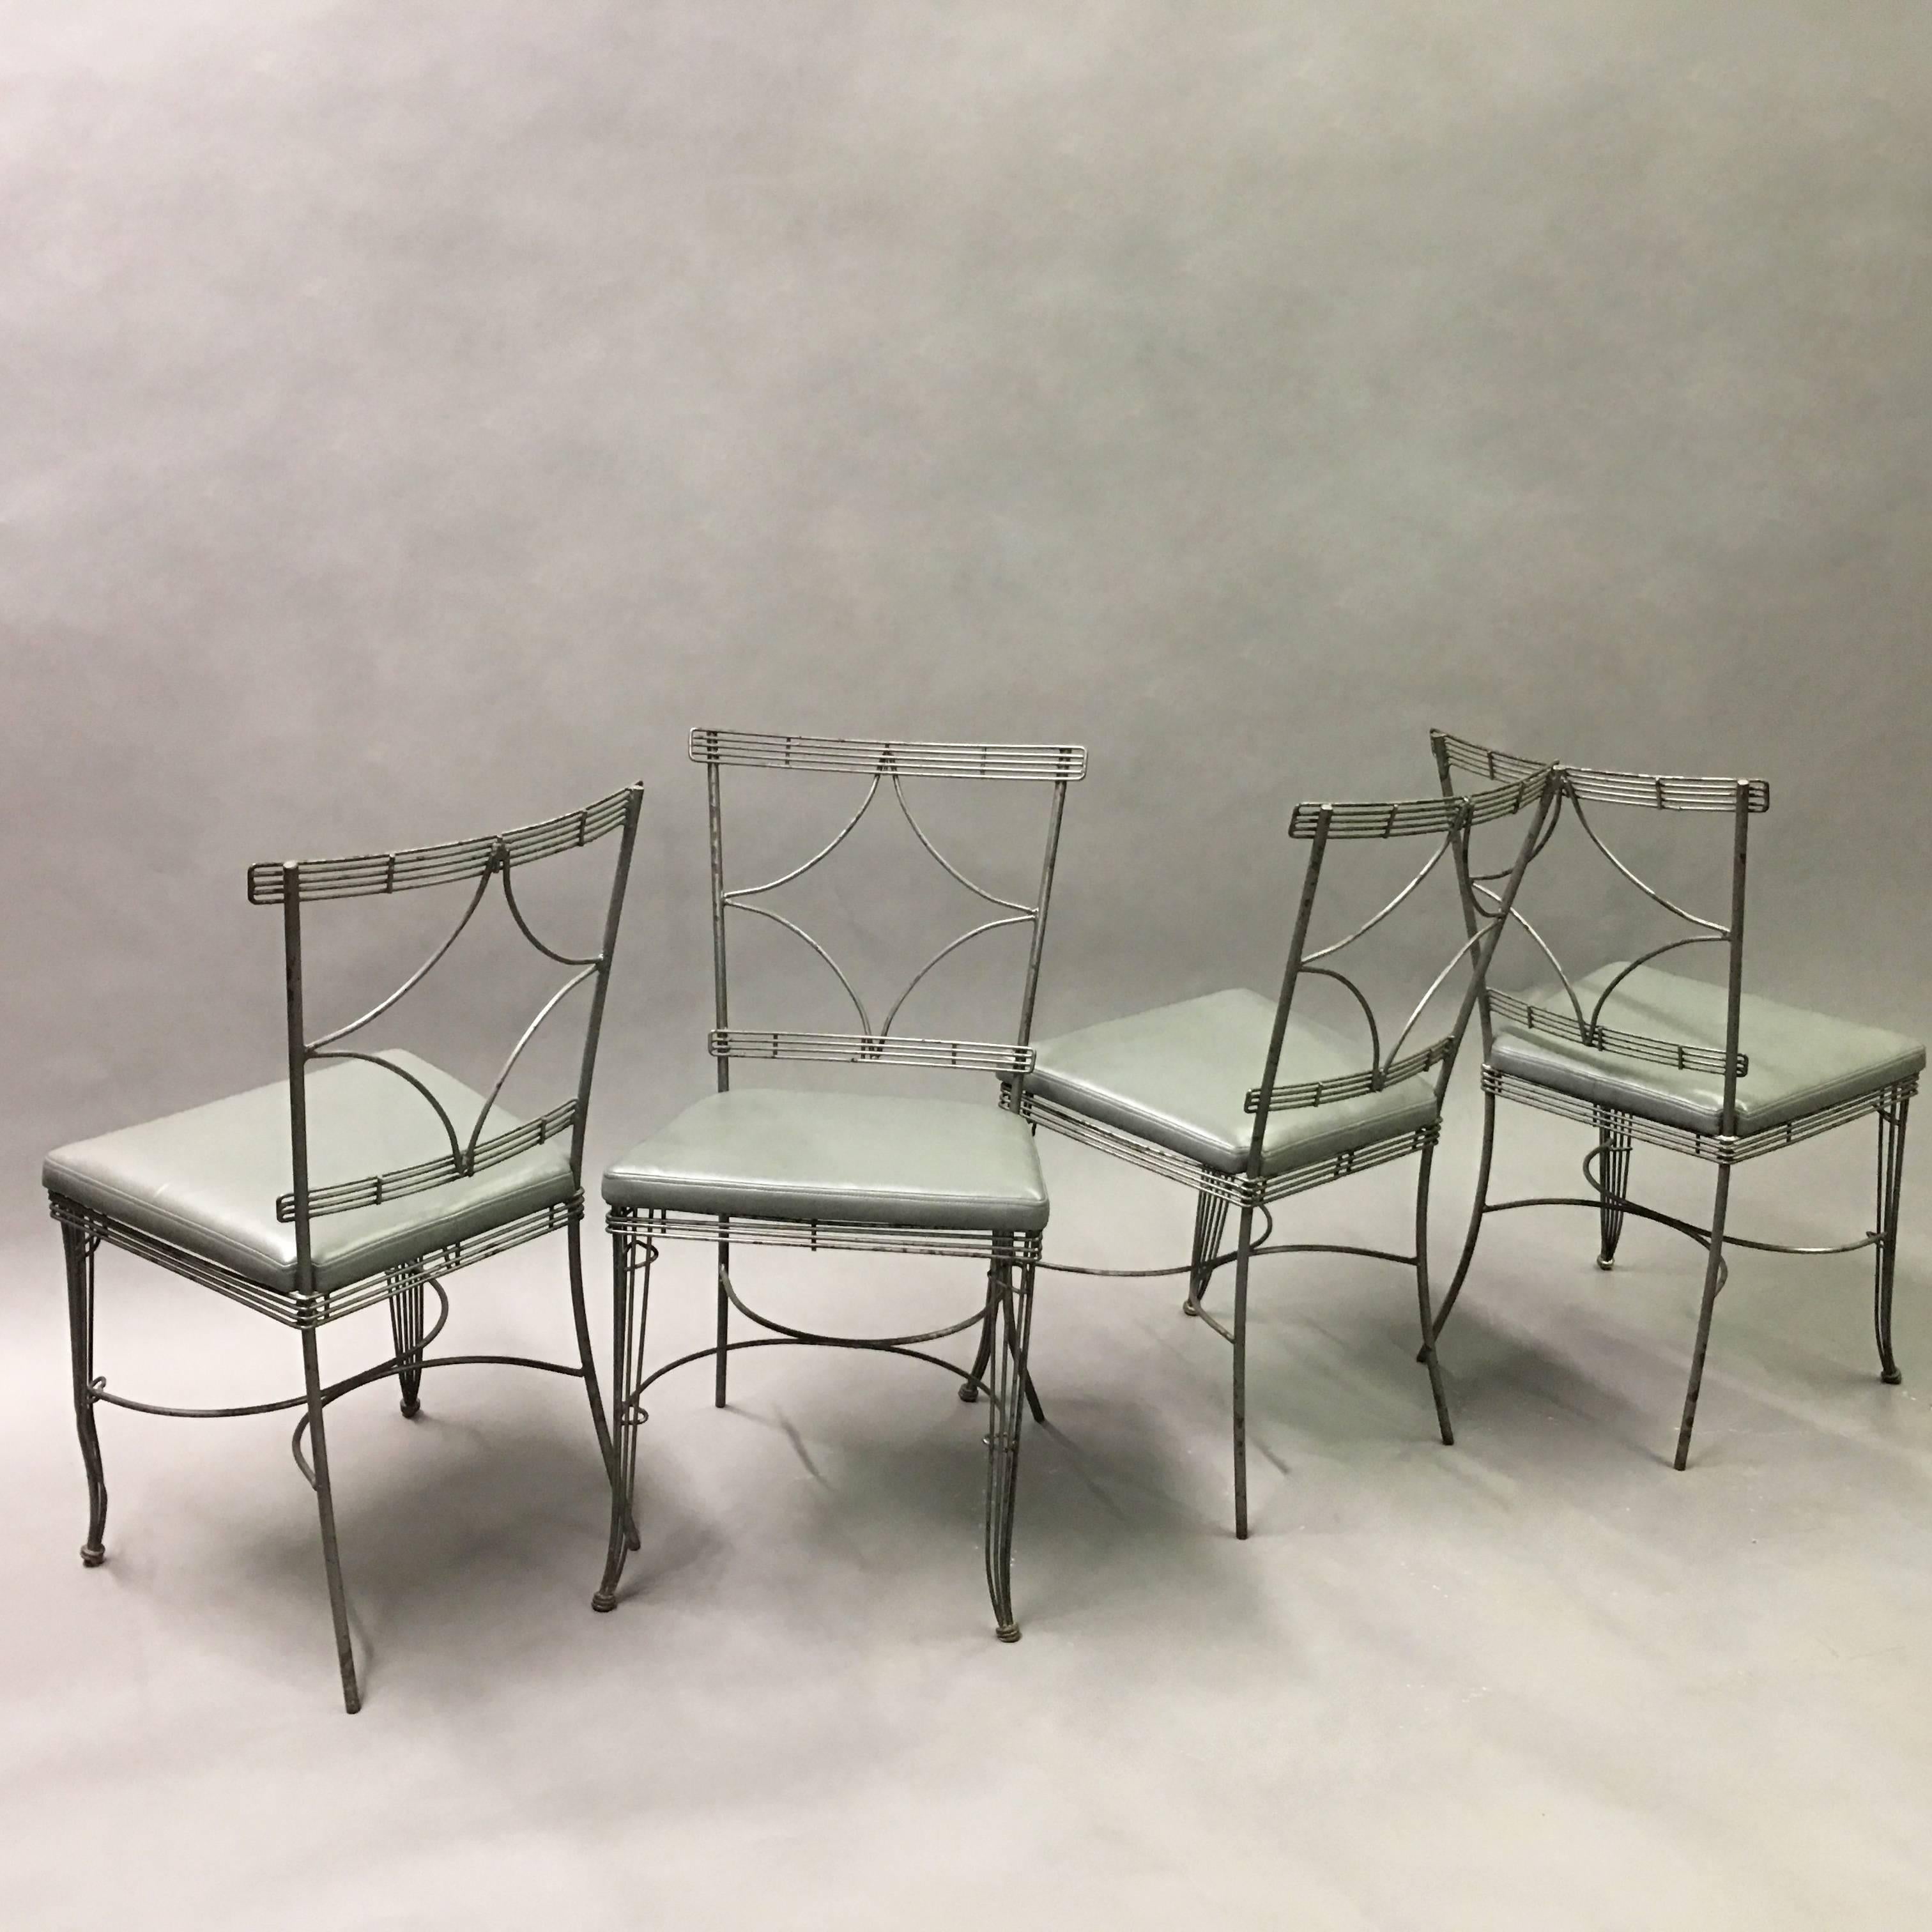 Wonderful set of four, midcentury, Hollywood Regency dining chairs feature brushed steel wire frames with diamond backs and newly upholstered seats in gray vinyl. This set is perfect for a sunroom but not recommended for outdoor use.